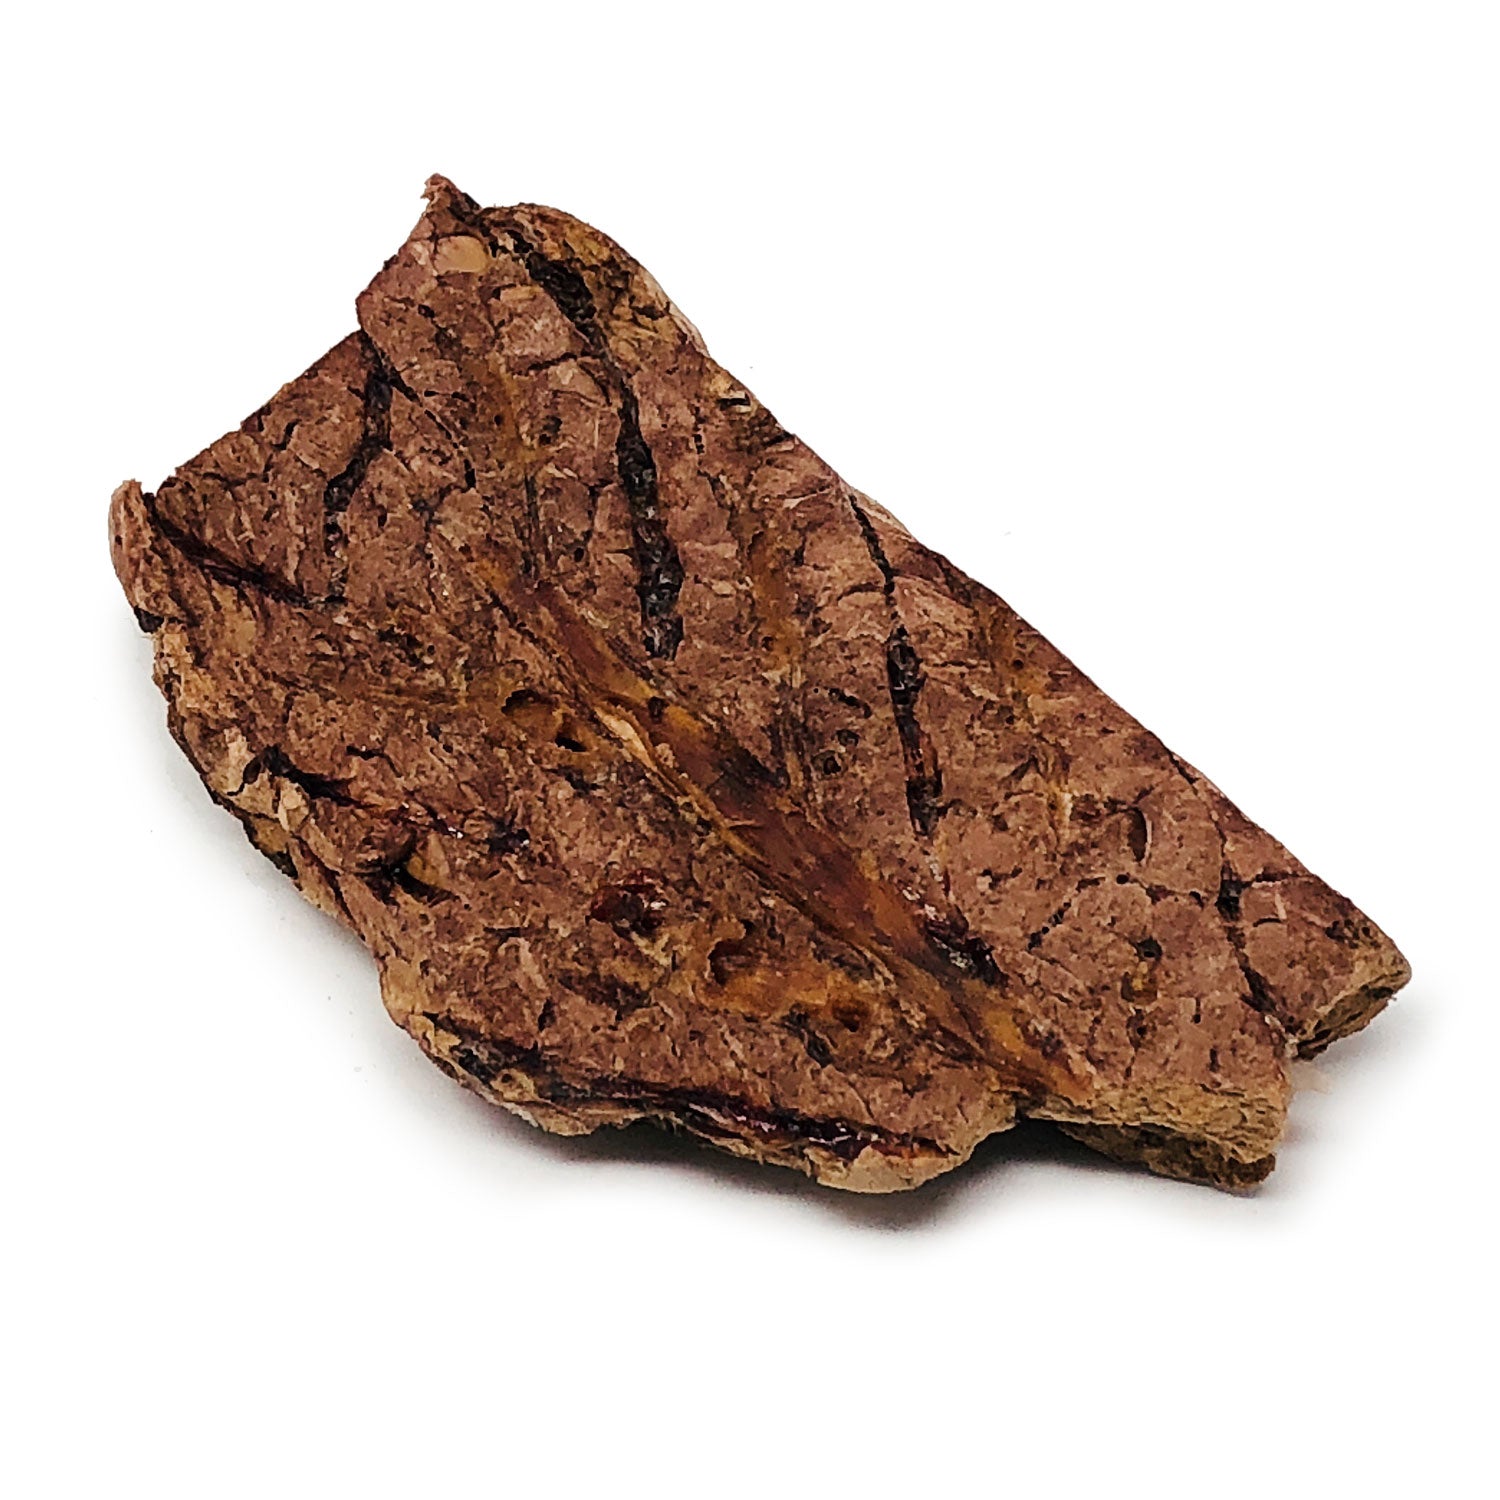 ValueBull USA Beef Lung Dog Chews, Sliced, 6 Pounds